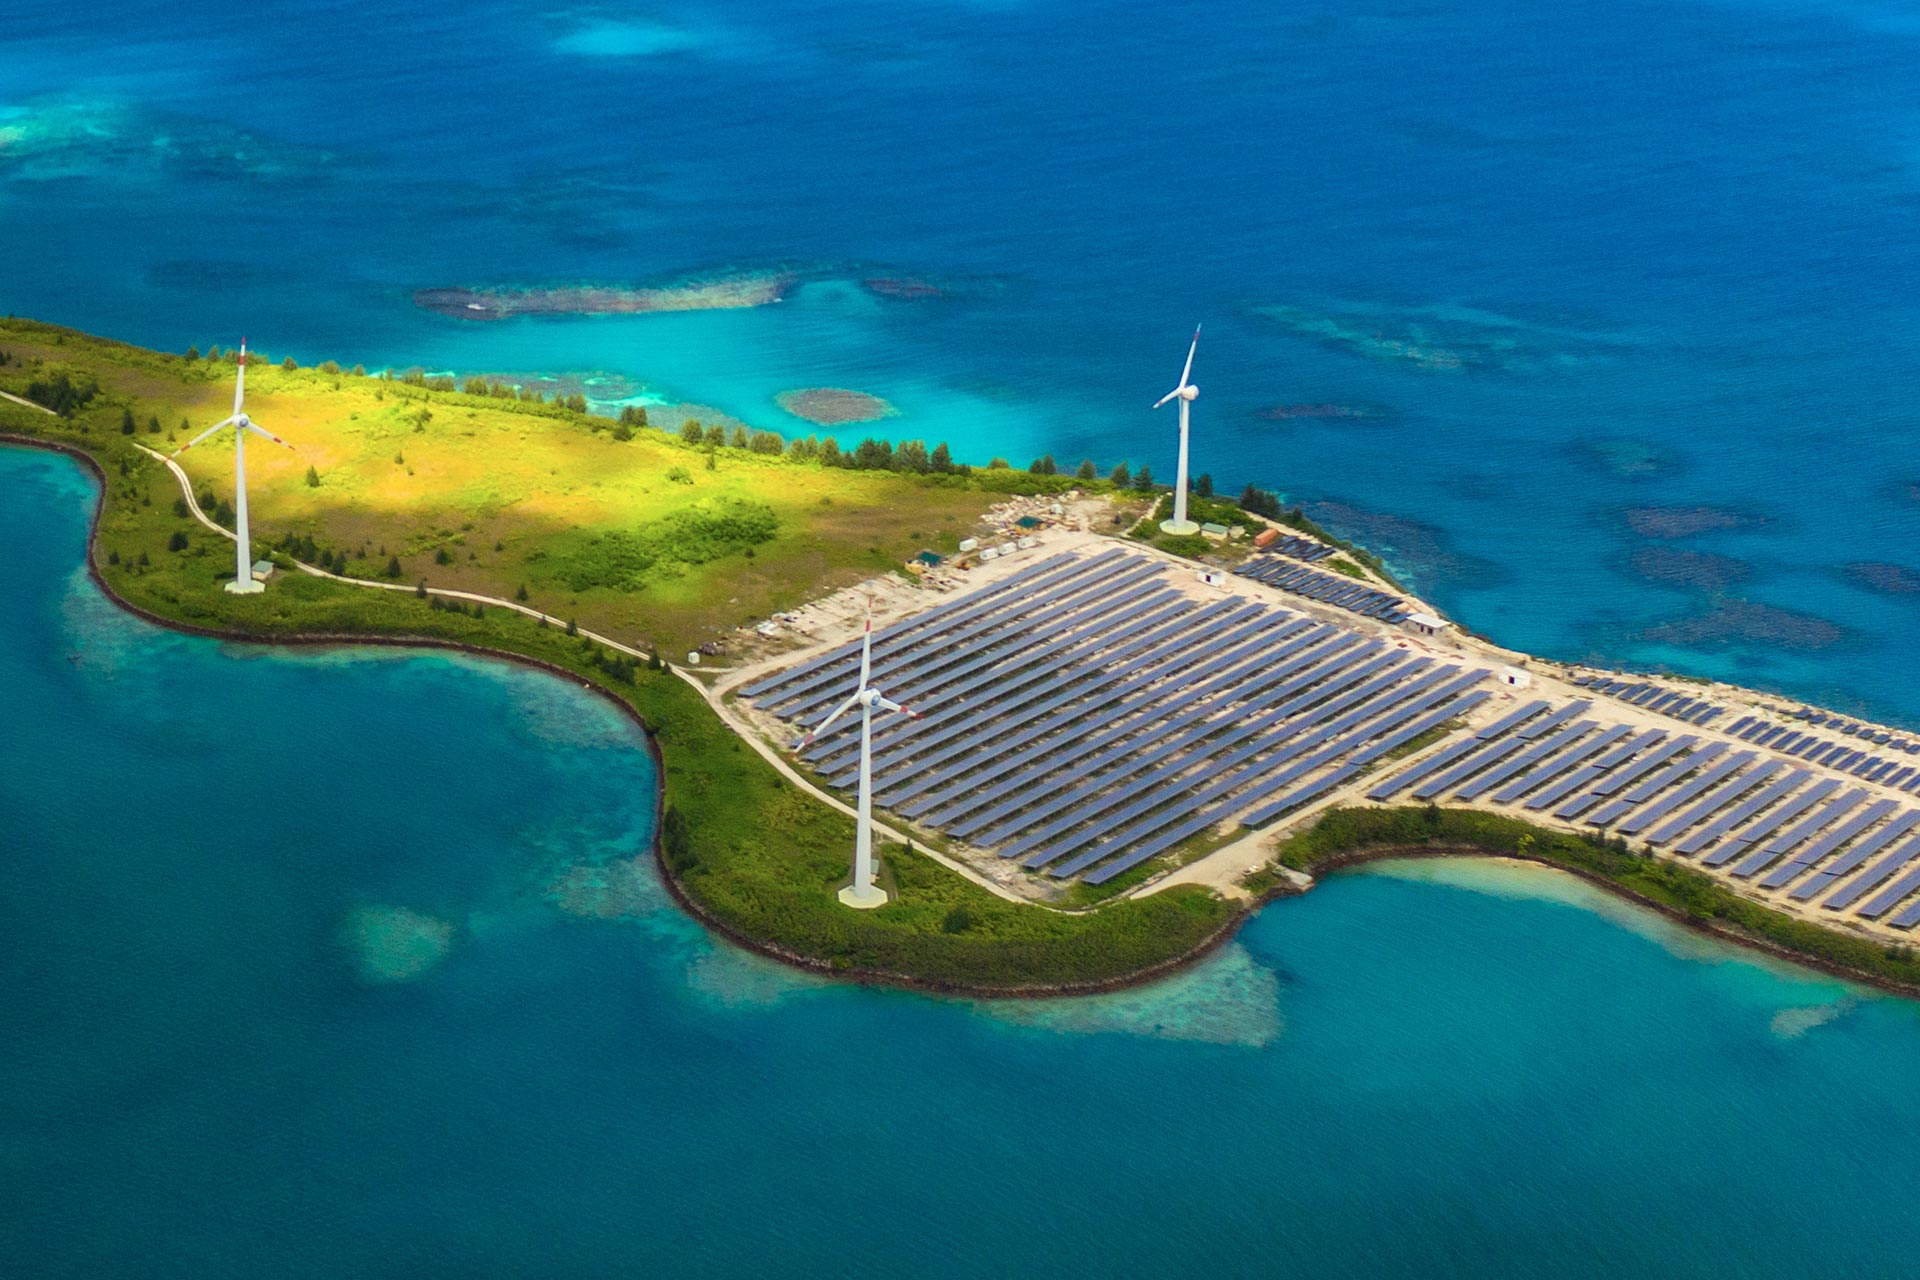 microgrid energy storage system on an island surrounded by ocean